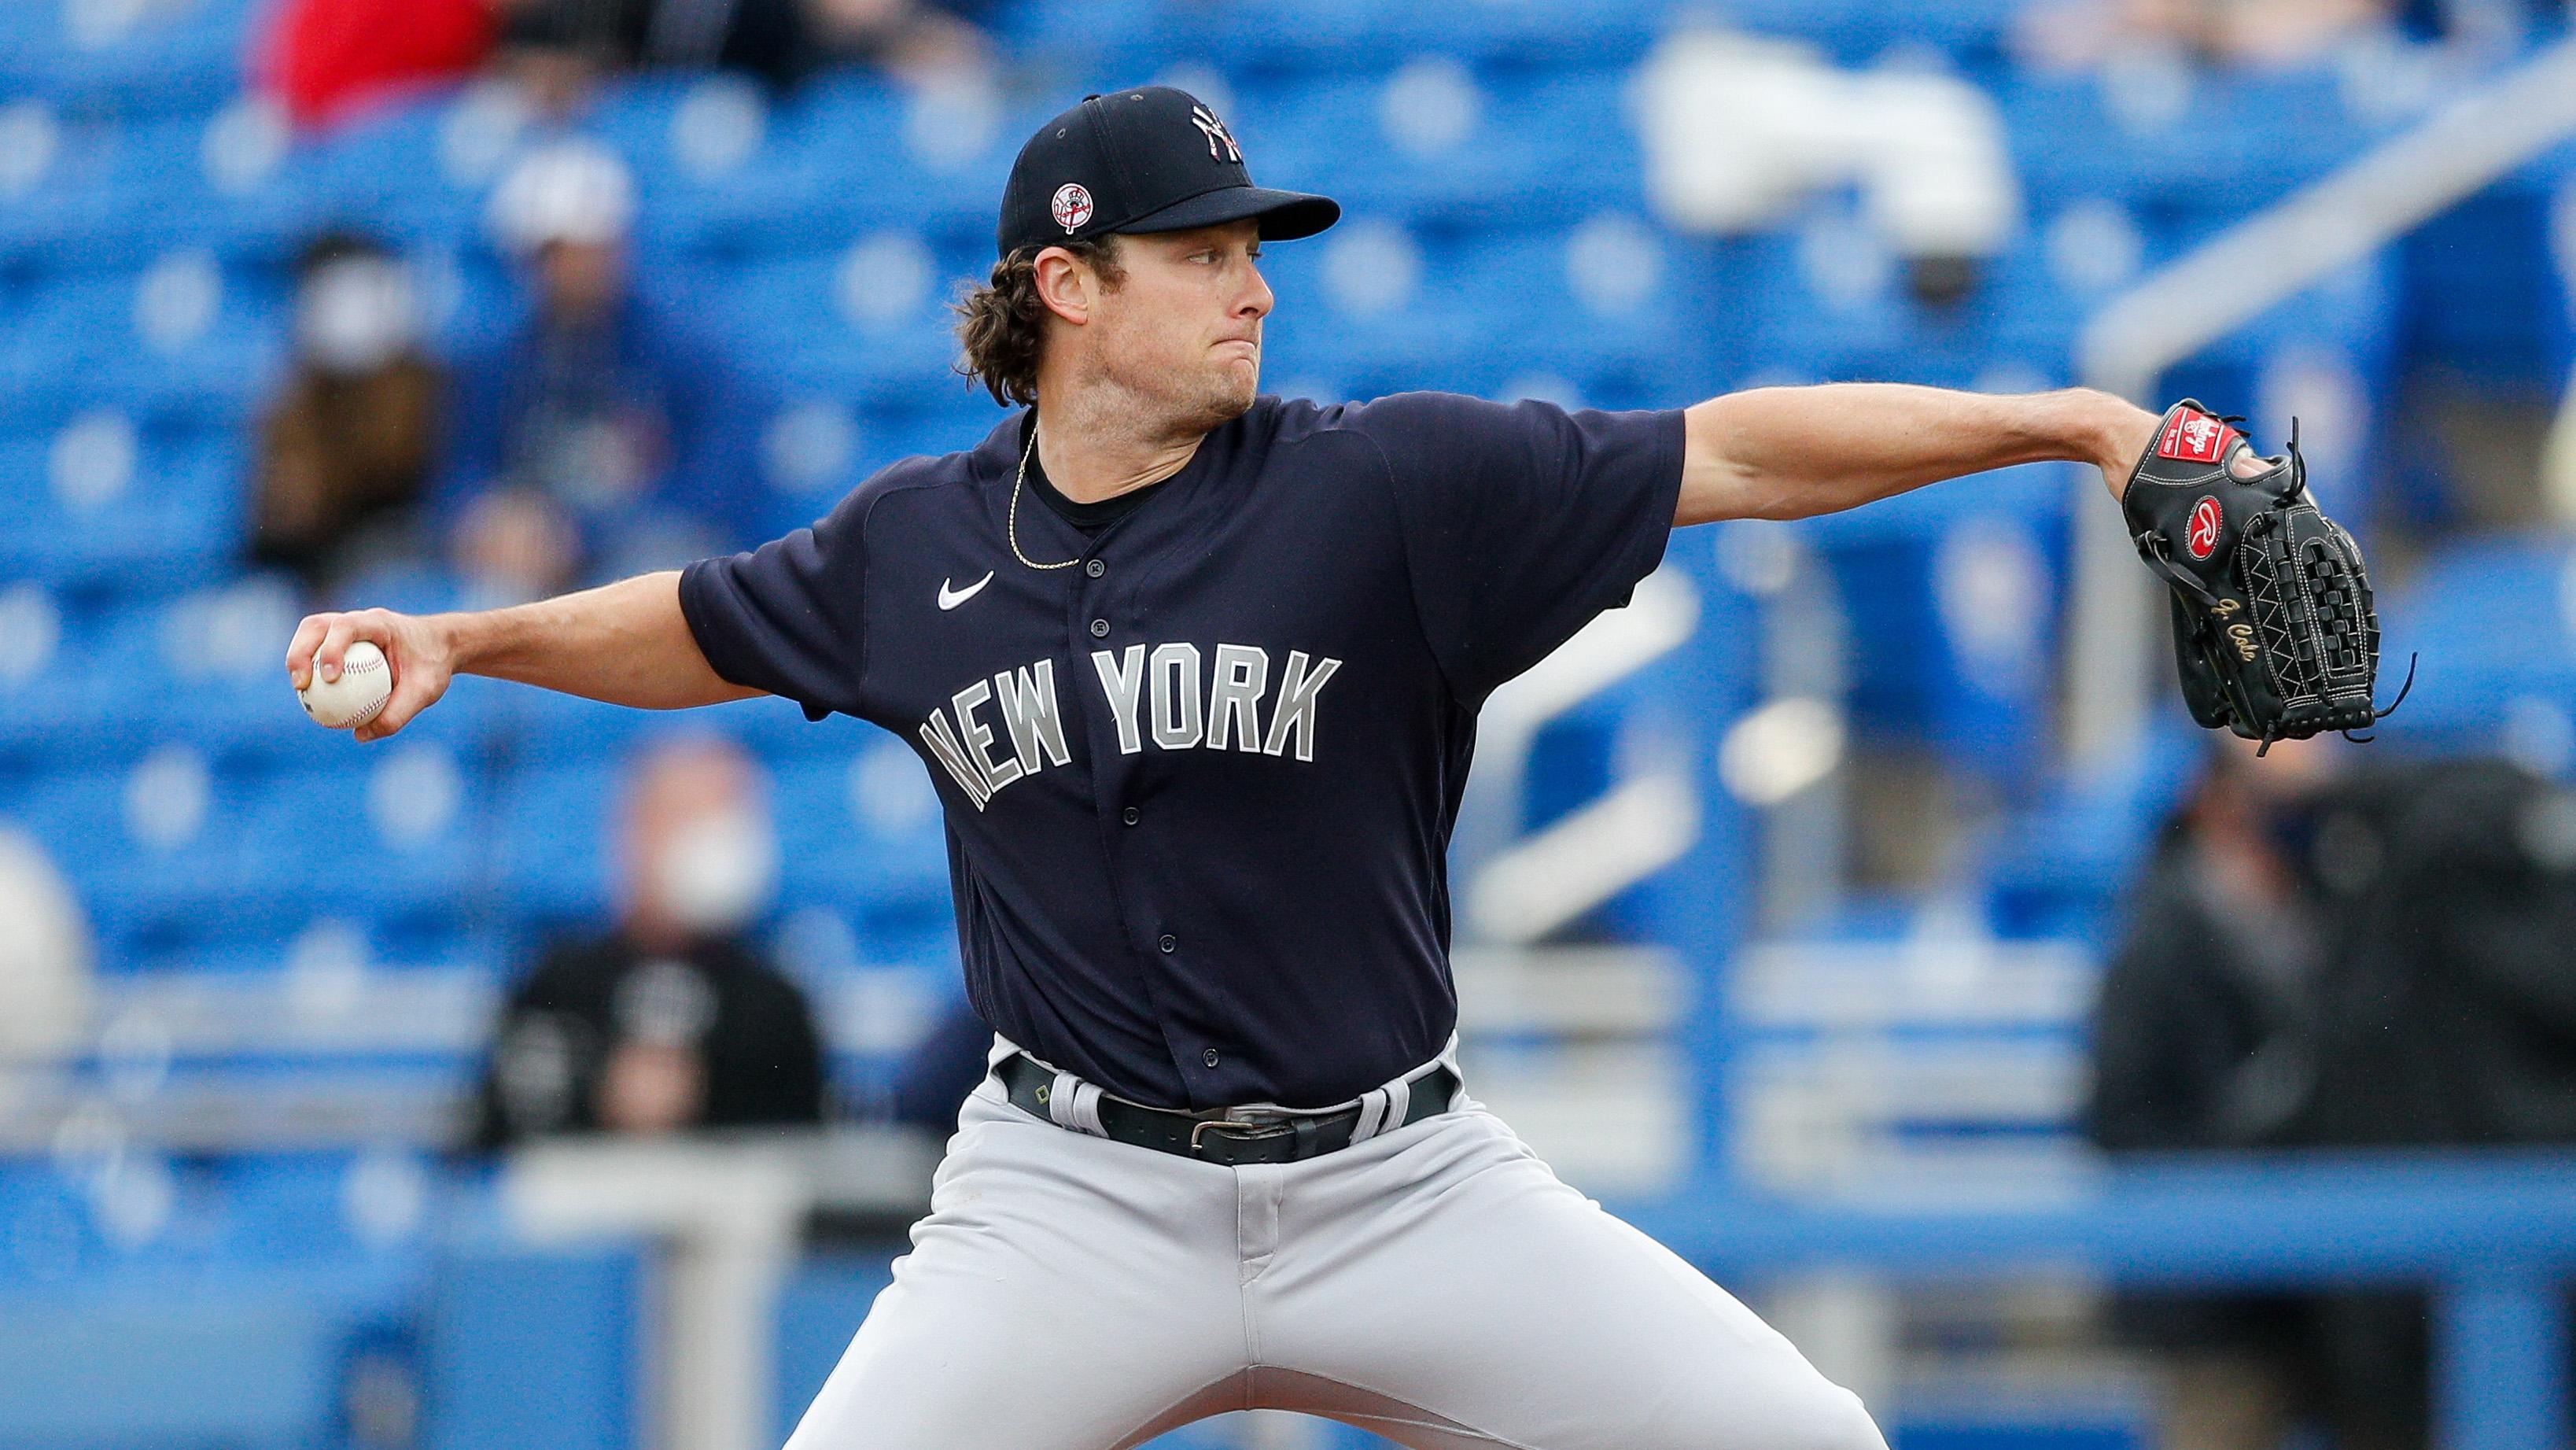 New York Yankees starting pitcher Gerrit Cole (45) pitches in the first inning against the Toronto Blue Jays during spring training at TD Ballpark. / USA TODAY Sports